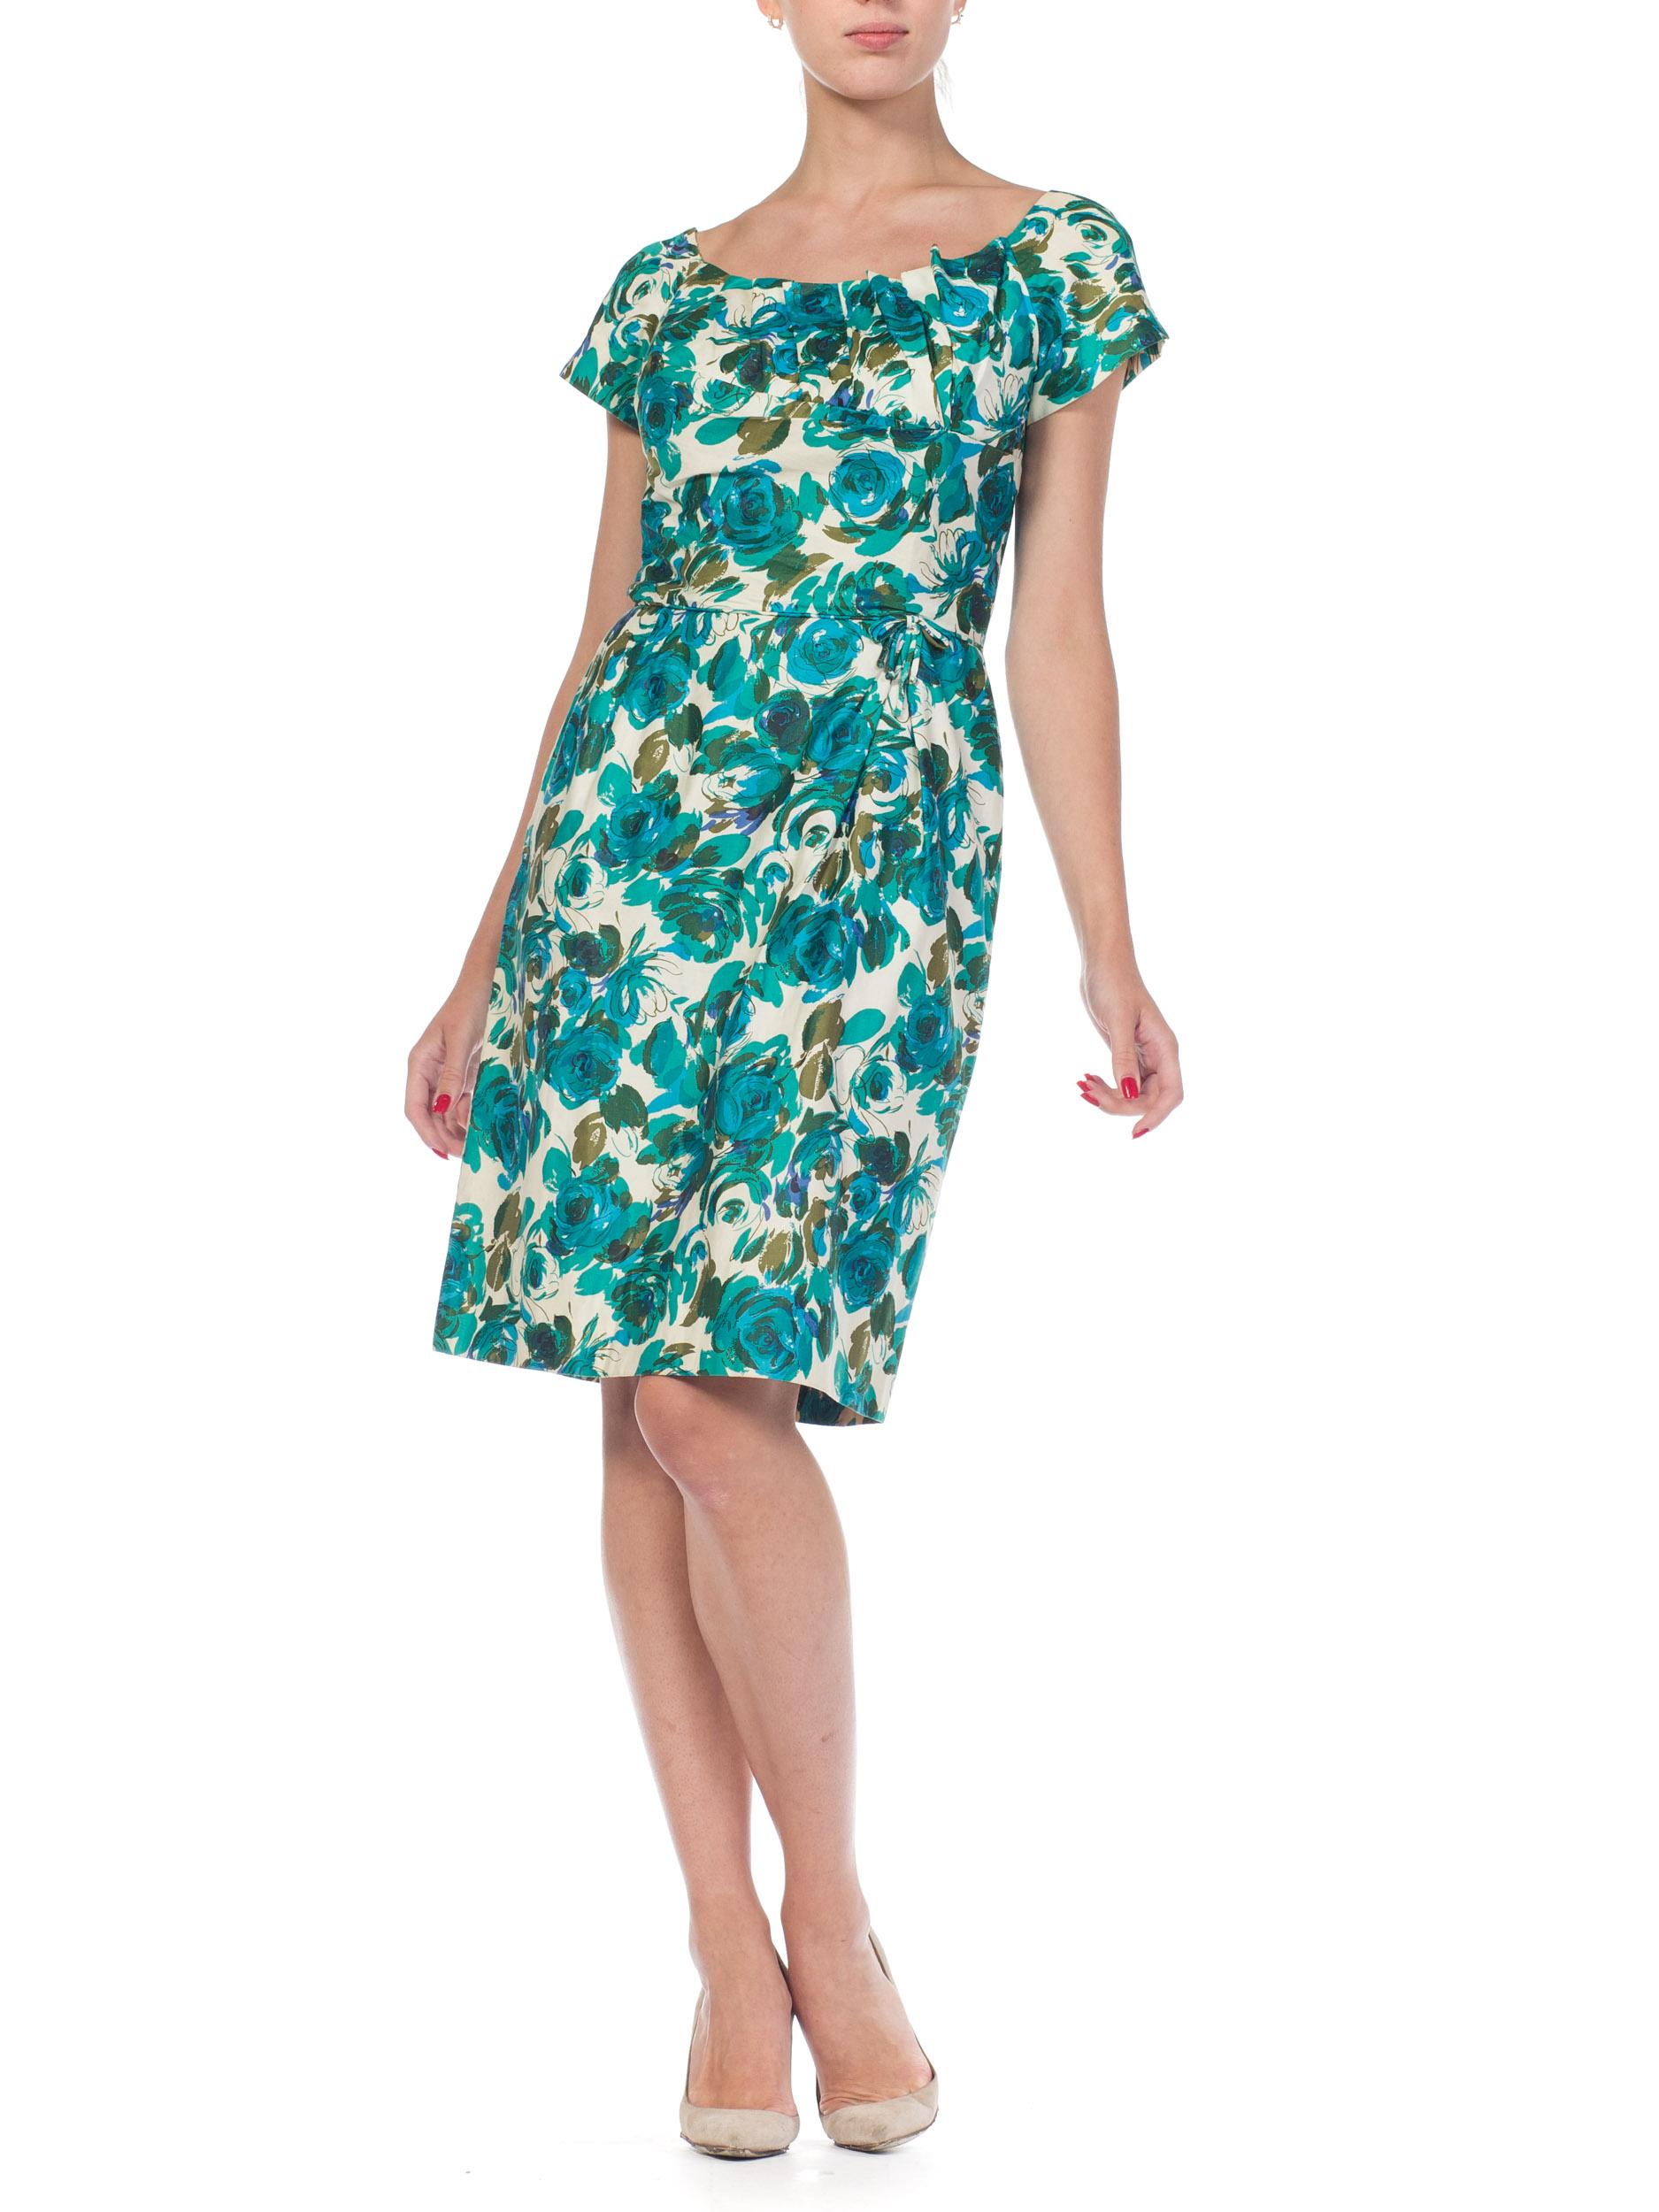 Women's 1950S Teal Floral Print Cotton Draped Bodice Dress With Cap Sleeves For Sale